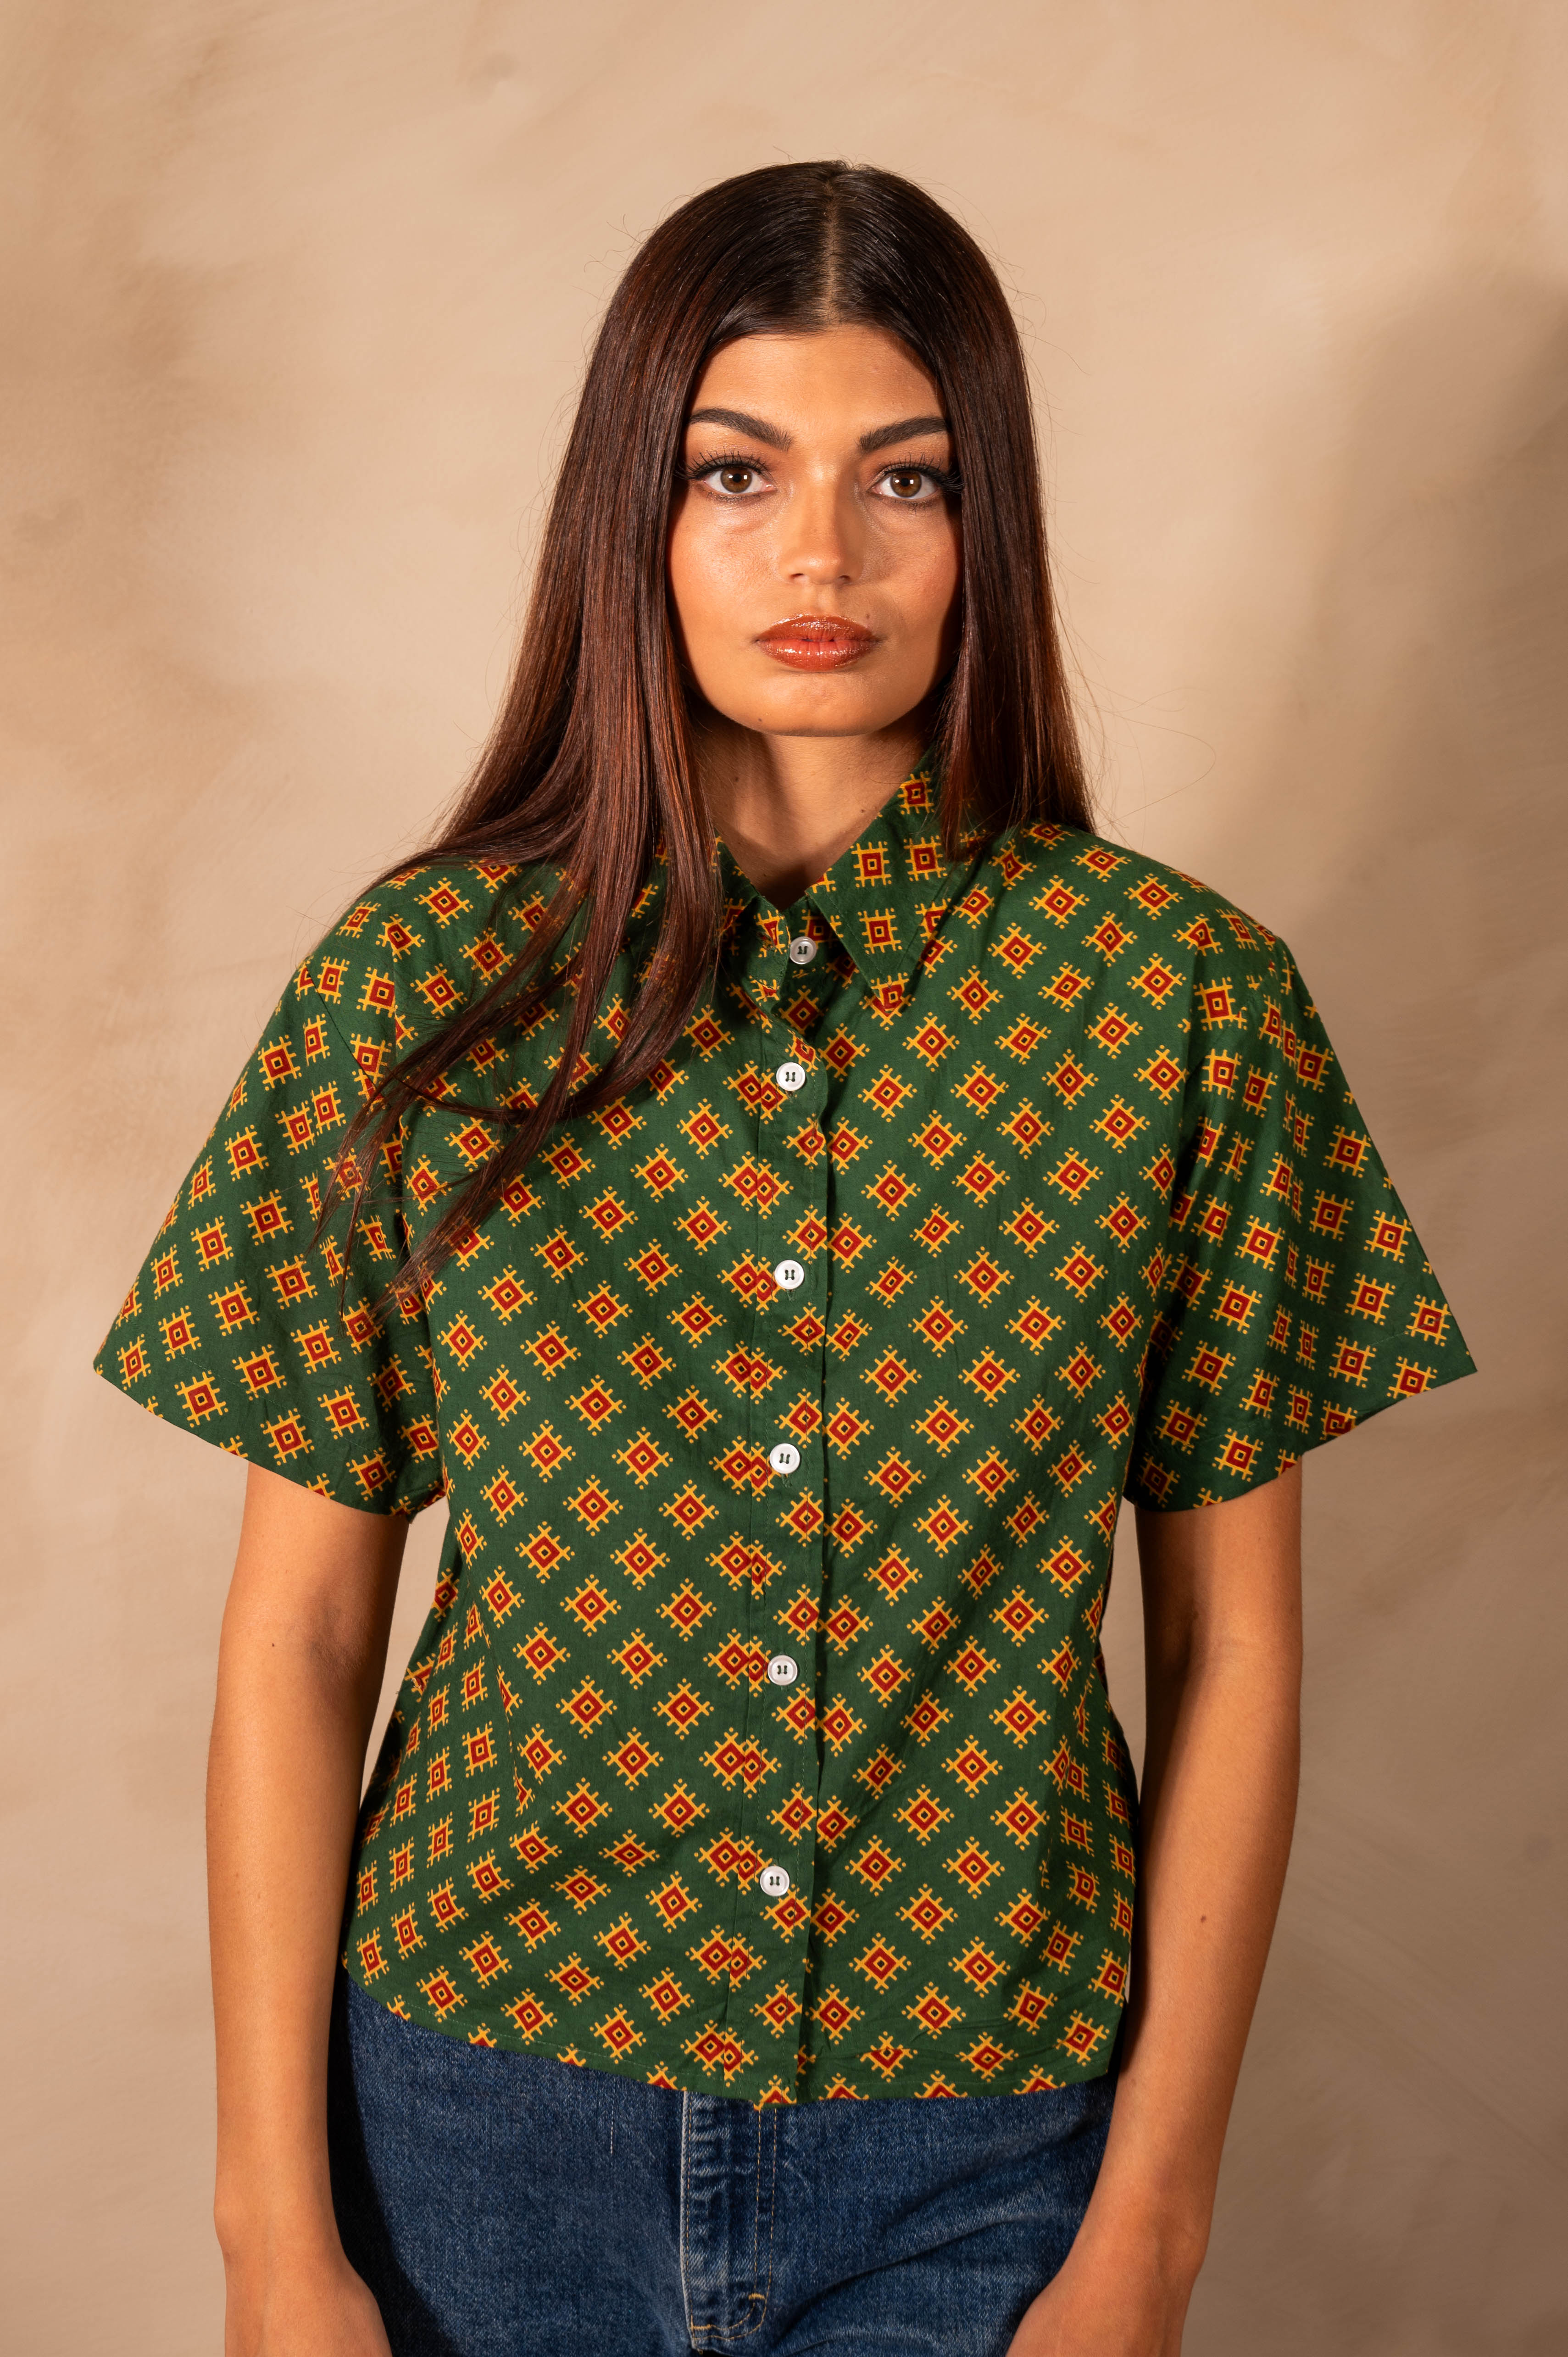 'The Michelle' Hand Printed Short Sleeve Shirt in Green and Gold Motif Print